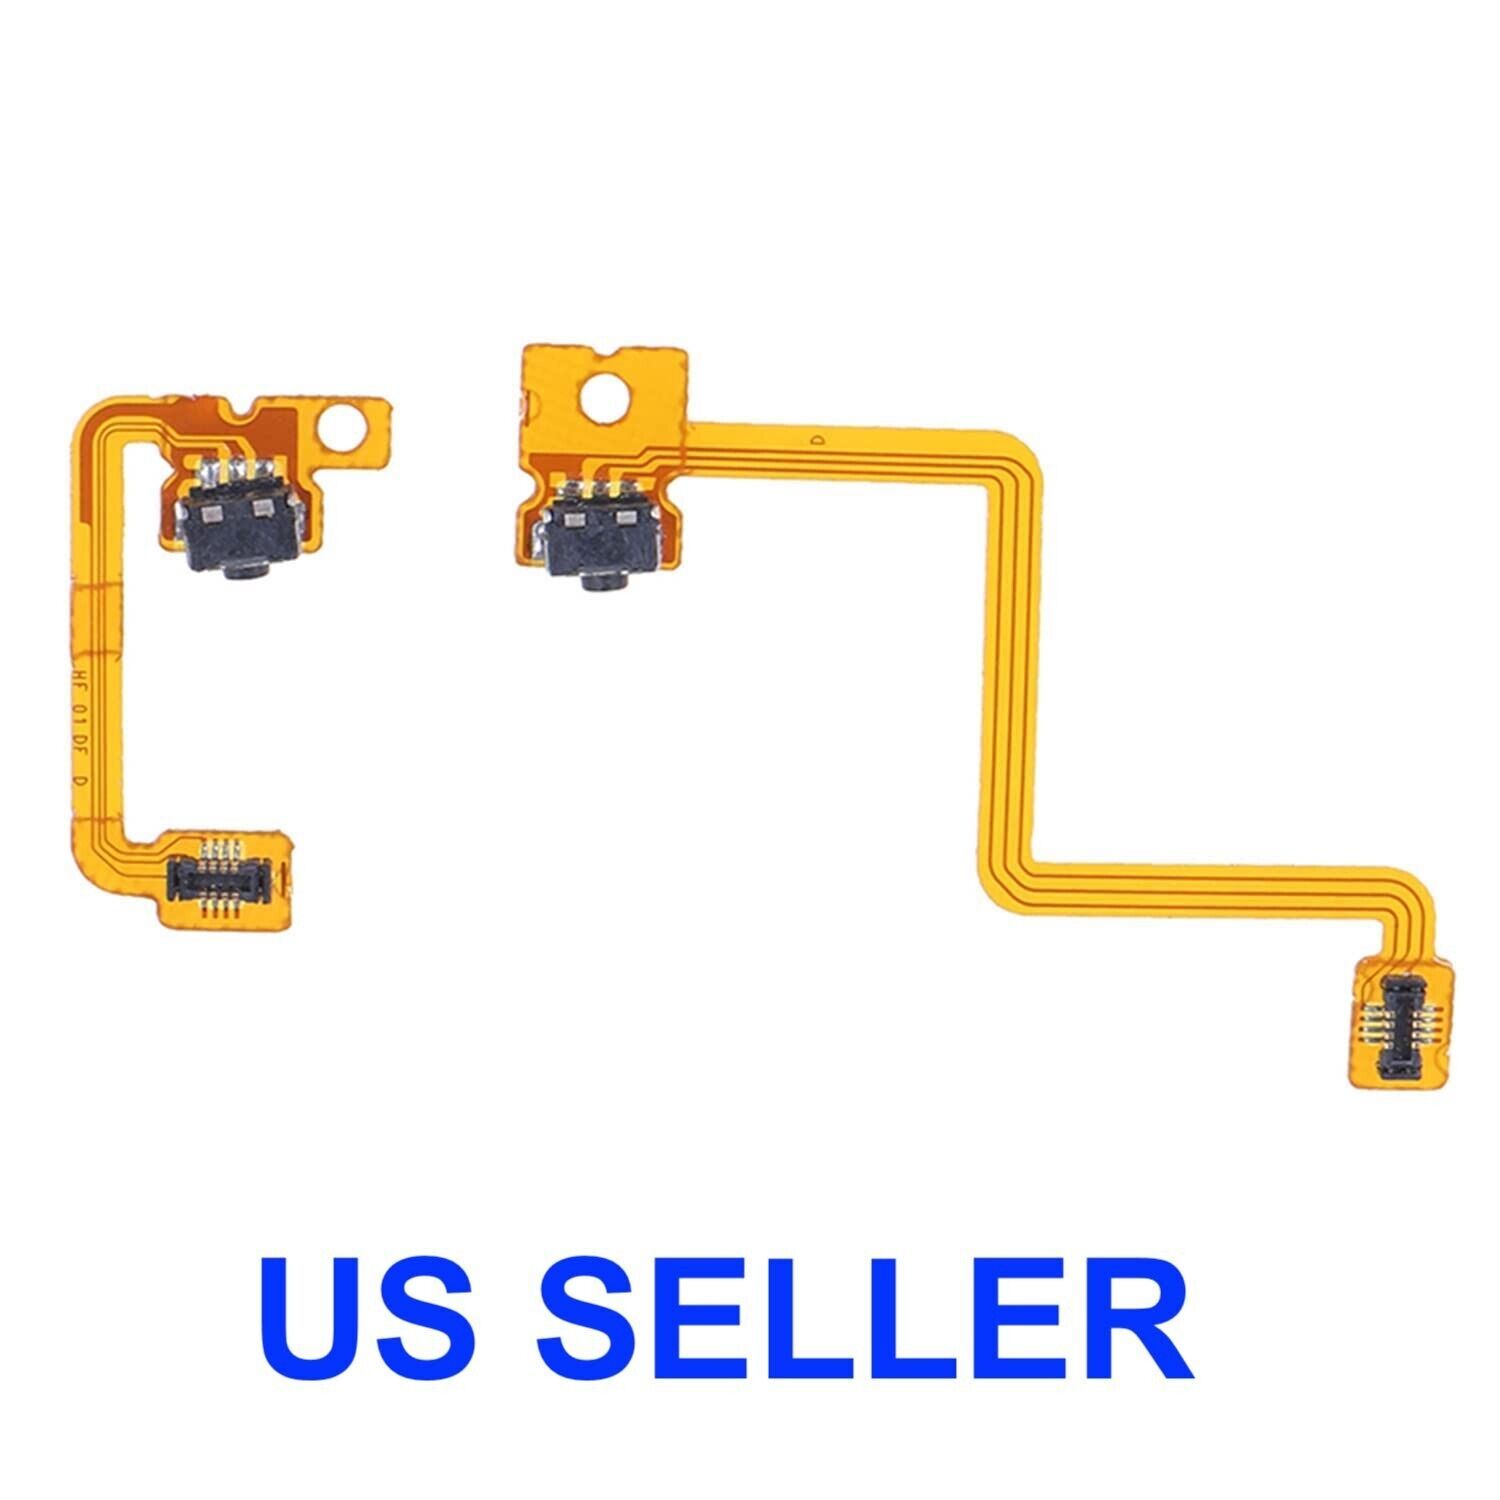 Primary image for Replacement Left Right L/R Shoulder Trigger Button Flex Cables for Nintendo 3DS